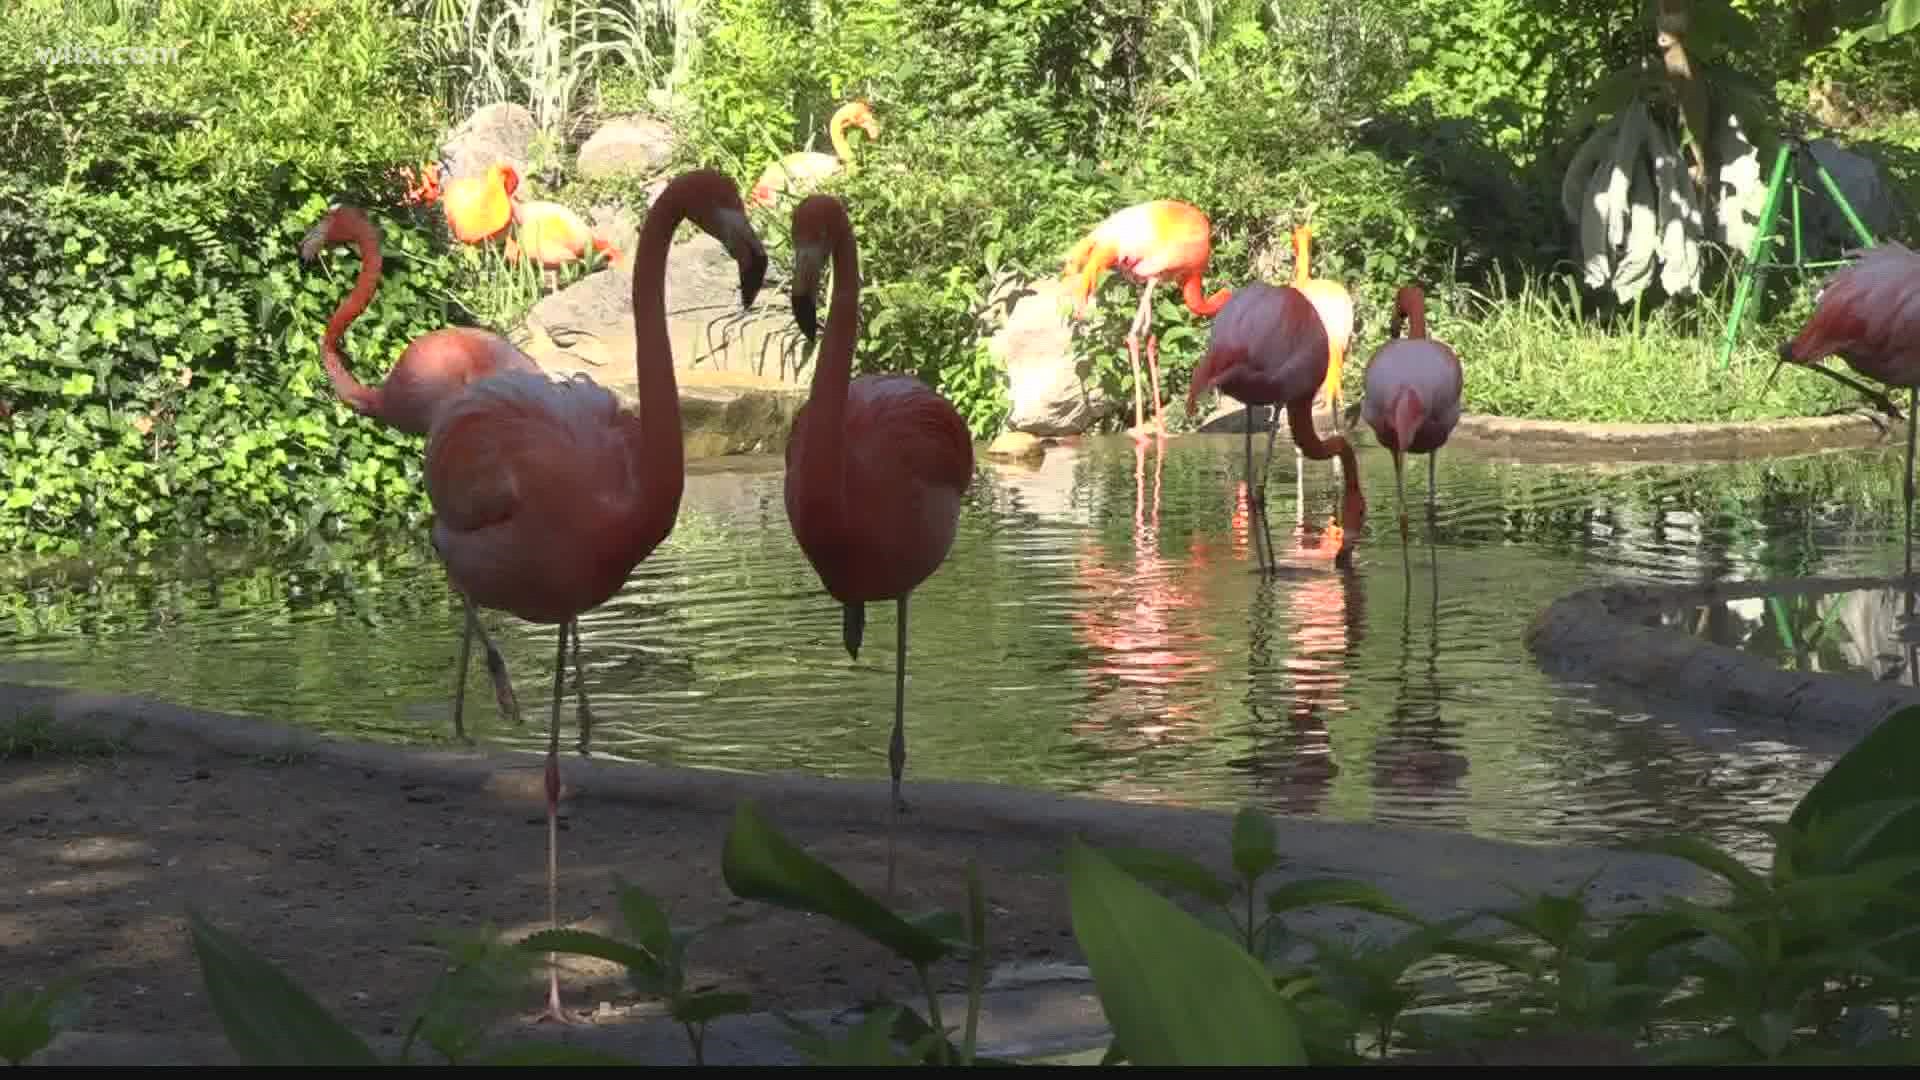 Riverbanks Zoo & Garden is seeking some $80 million in funding from Richland County for a massive improvements project.